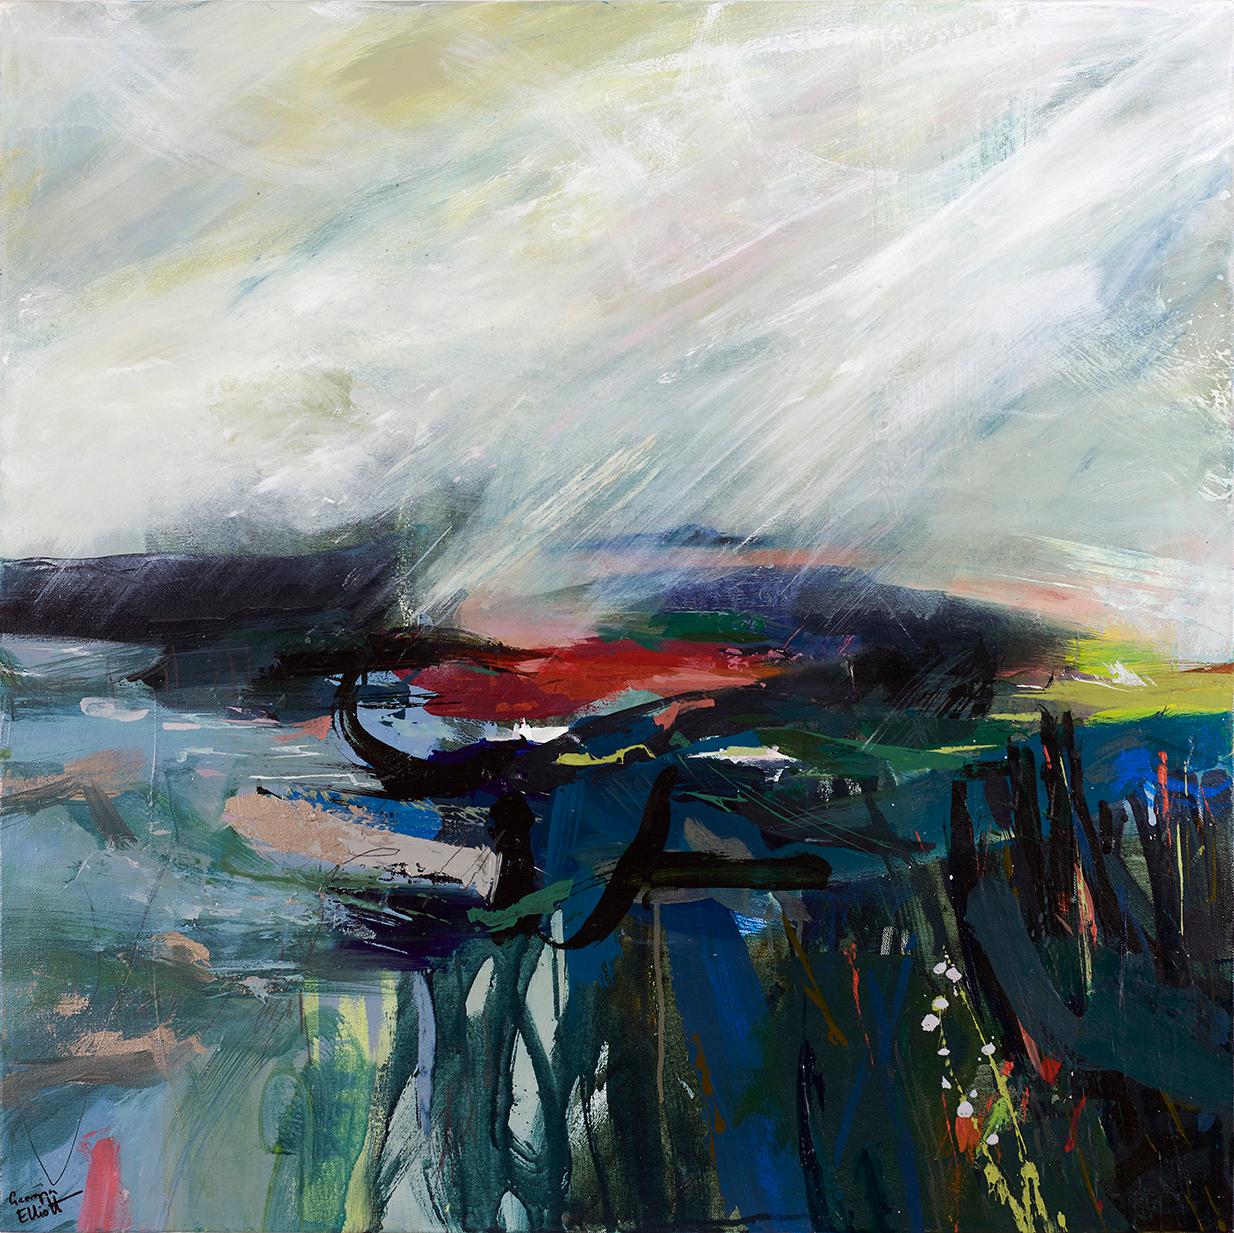 STEP AWAY FROM THE EDGE (94x94cm), Abstract, Modern art  - Gray Landscape Painting by Georgia Elliott